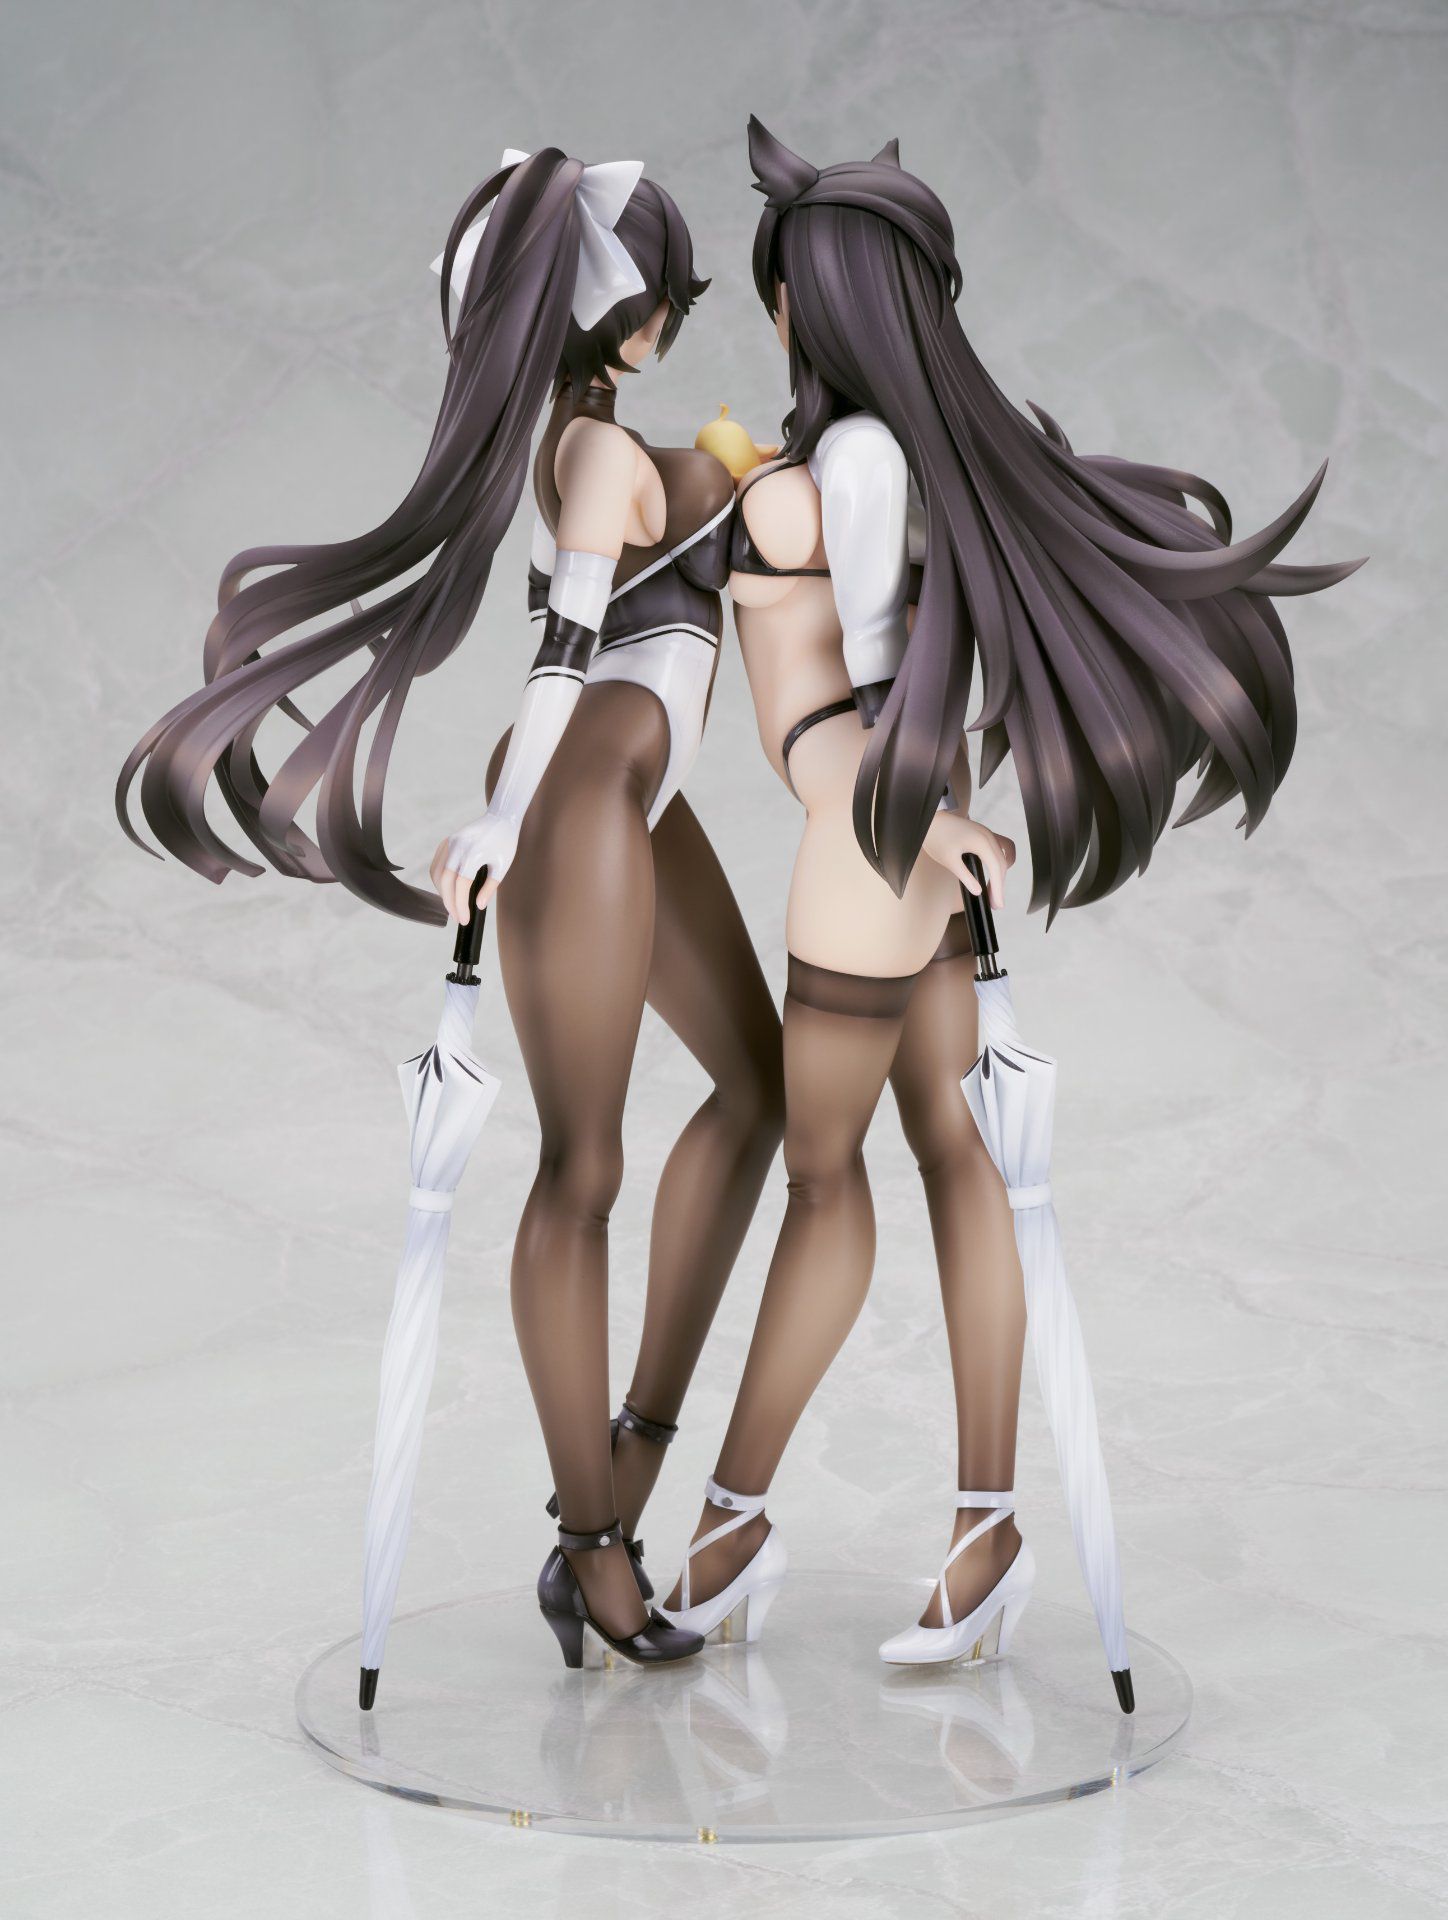 【Image】Recent beautiful girl figures, the modeling is too erotic and exceeds the tragic woman wwwww 4